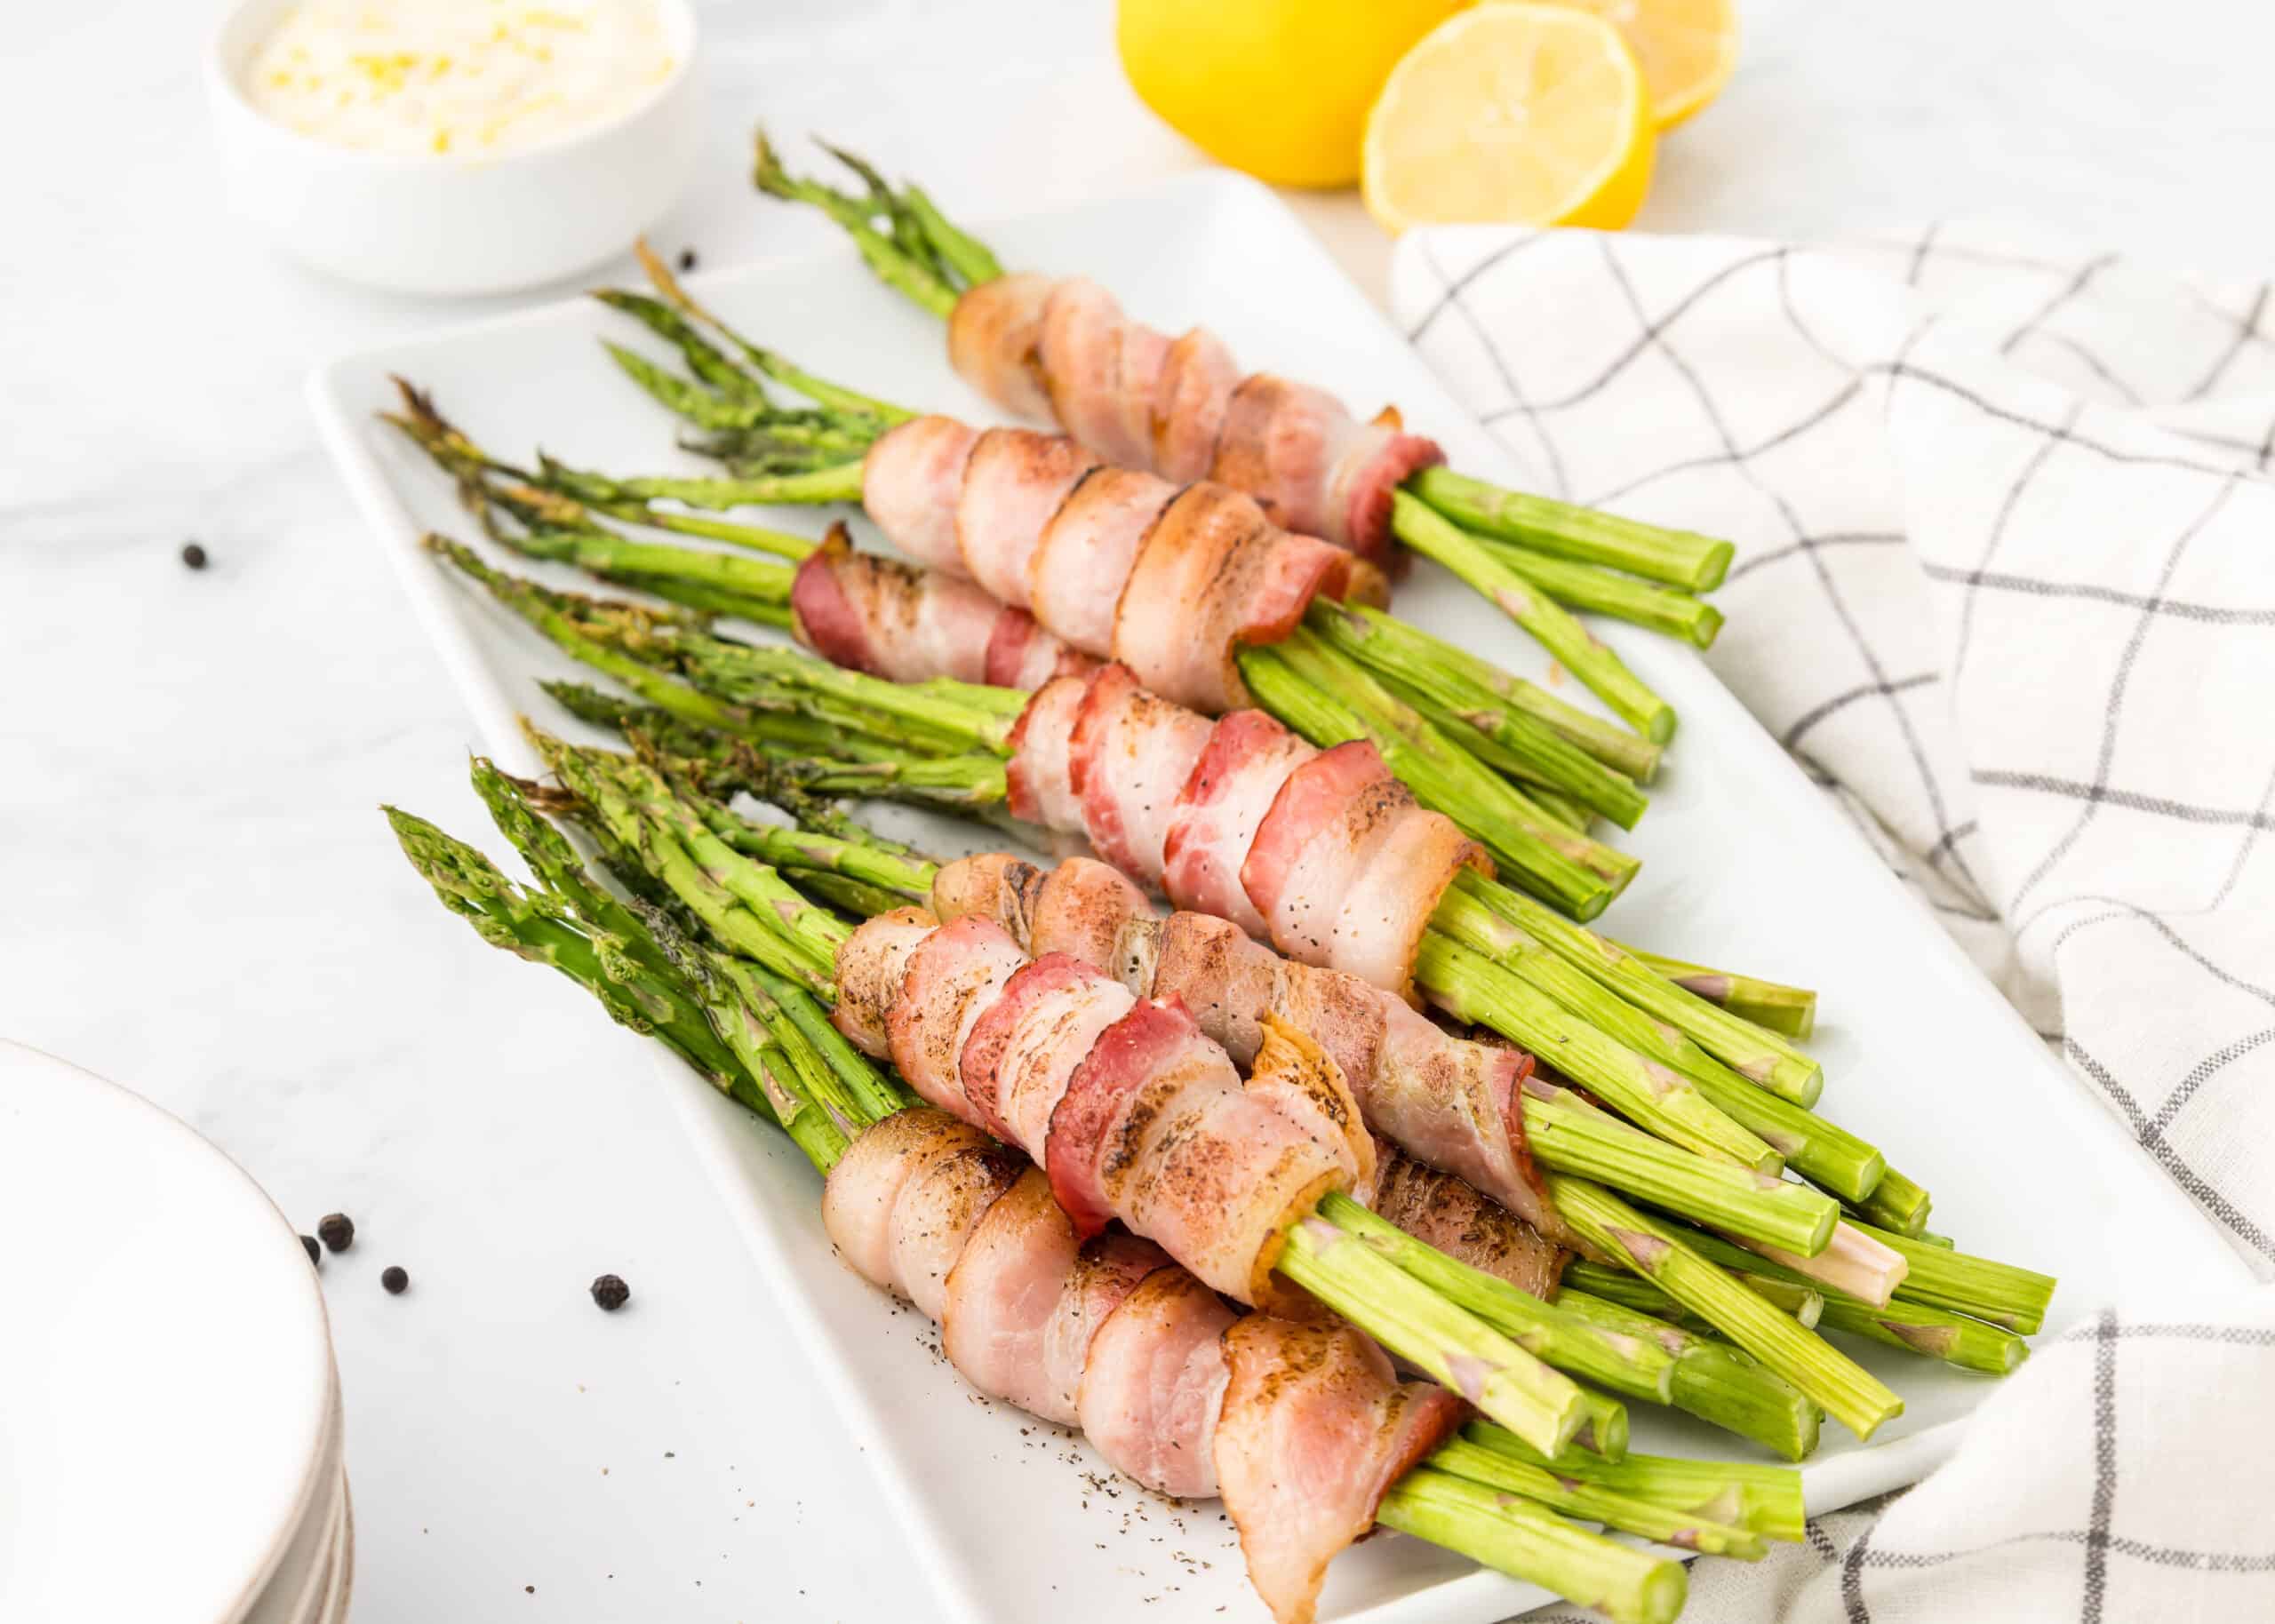 grilled bacon wrapped asparagus recipe with lemon aioli